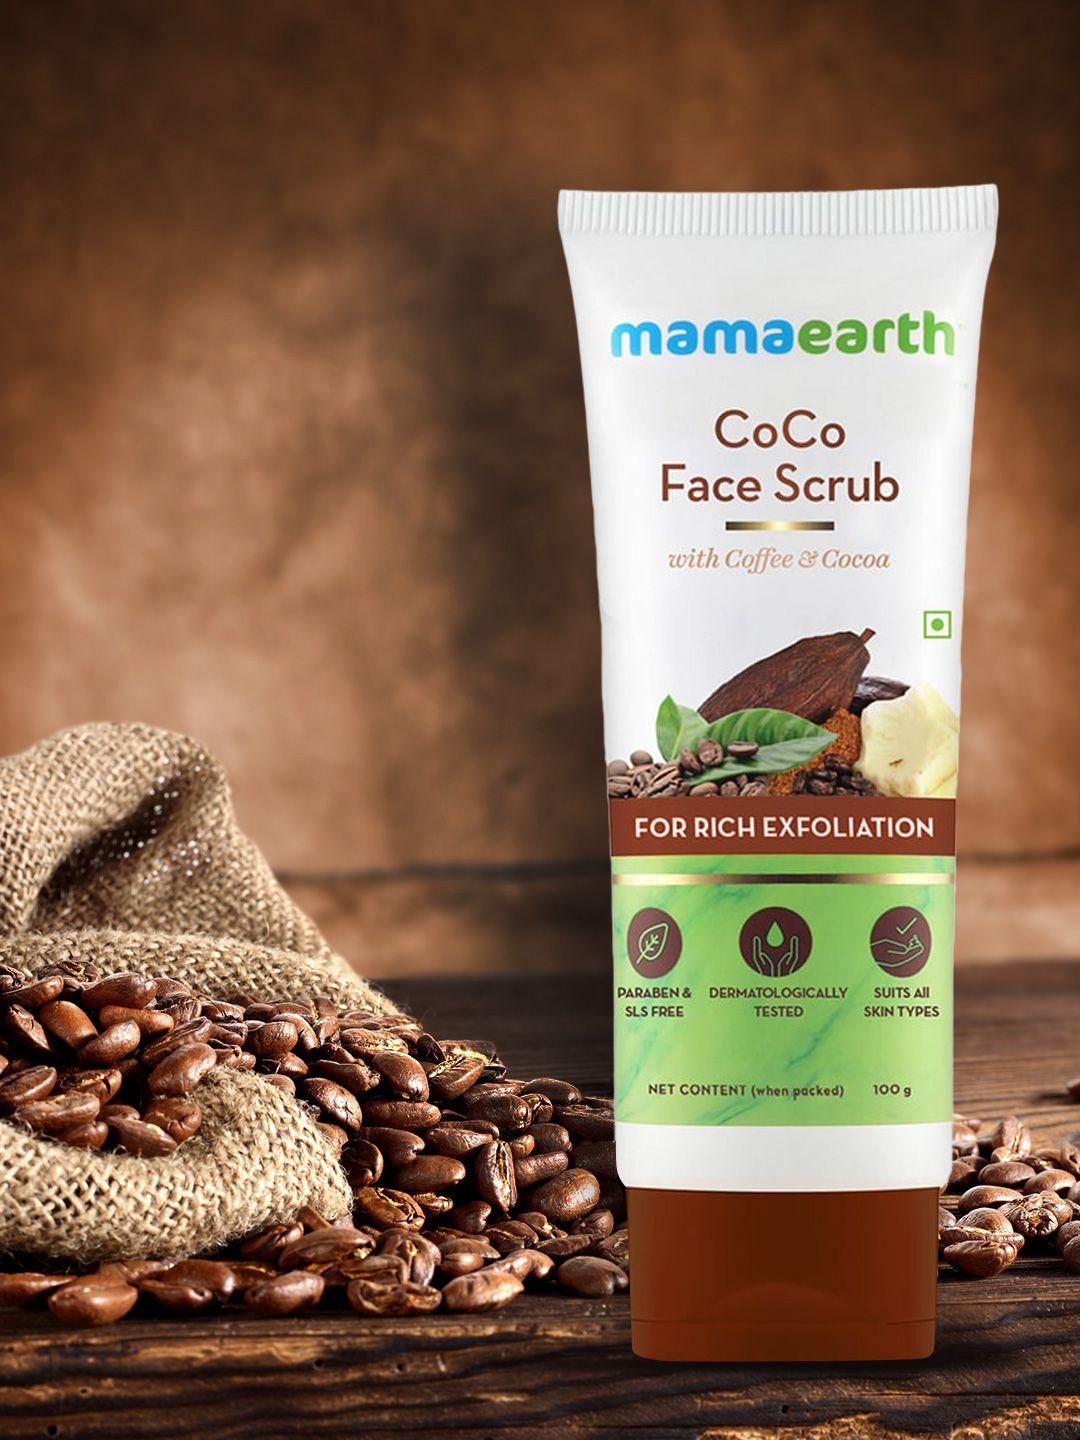 mamaearth sustainable coco face scrub with coffee & cocoa for rich exfoliation - 100 g